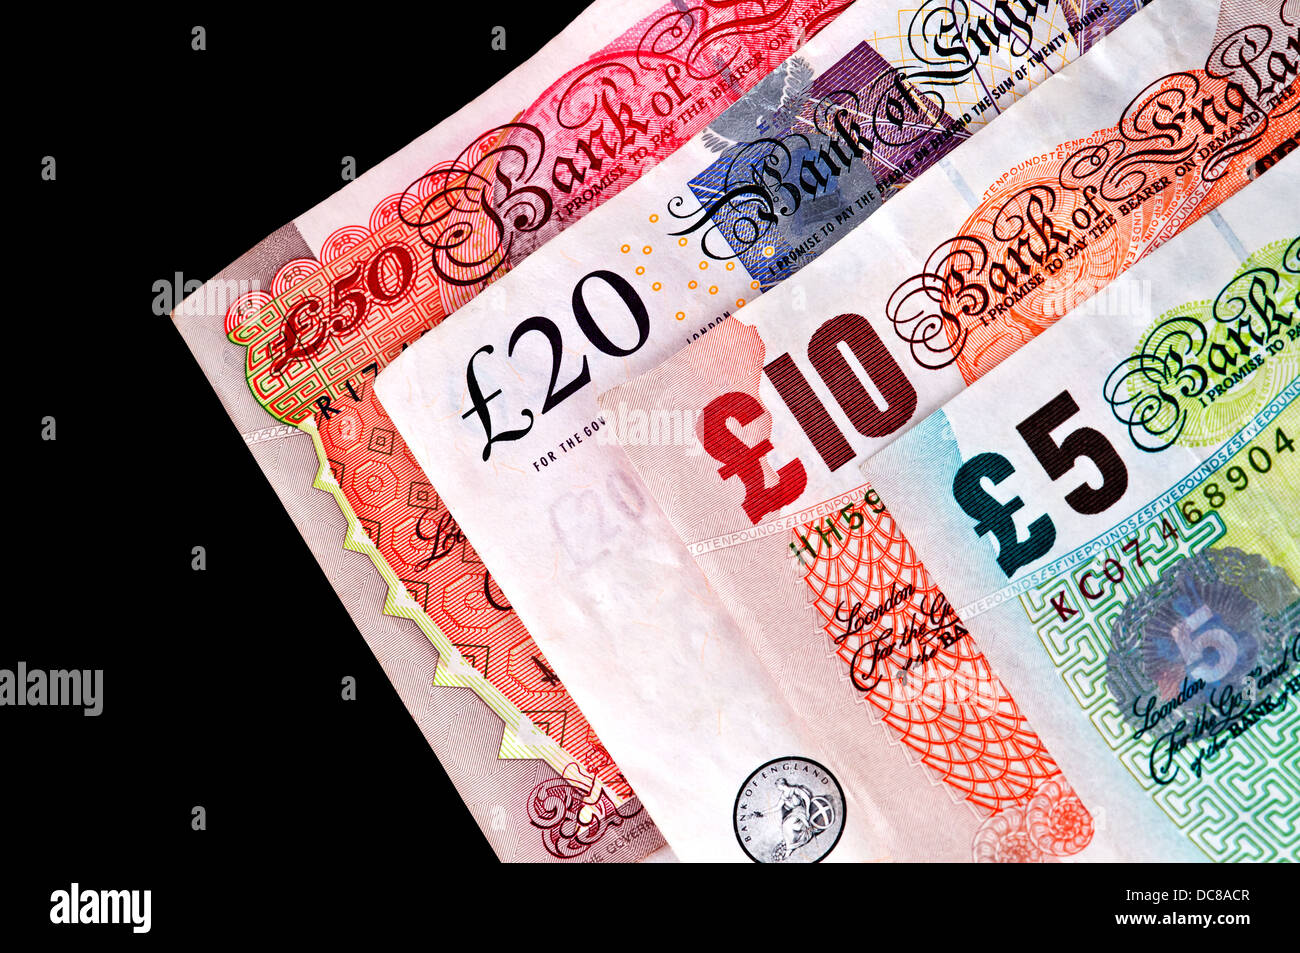 UK Currency paper money Banknotes clipping path Stock Photo